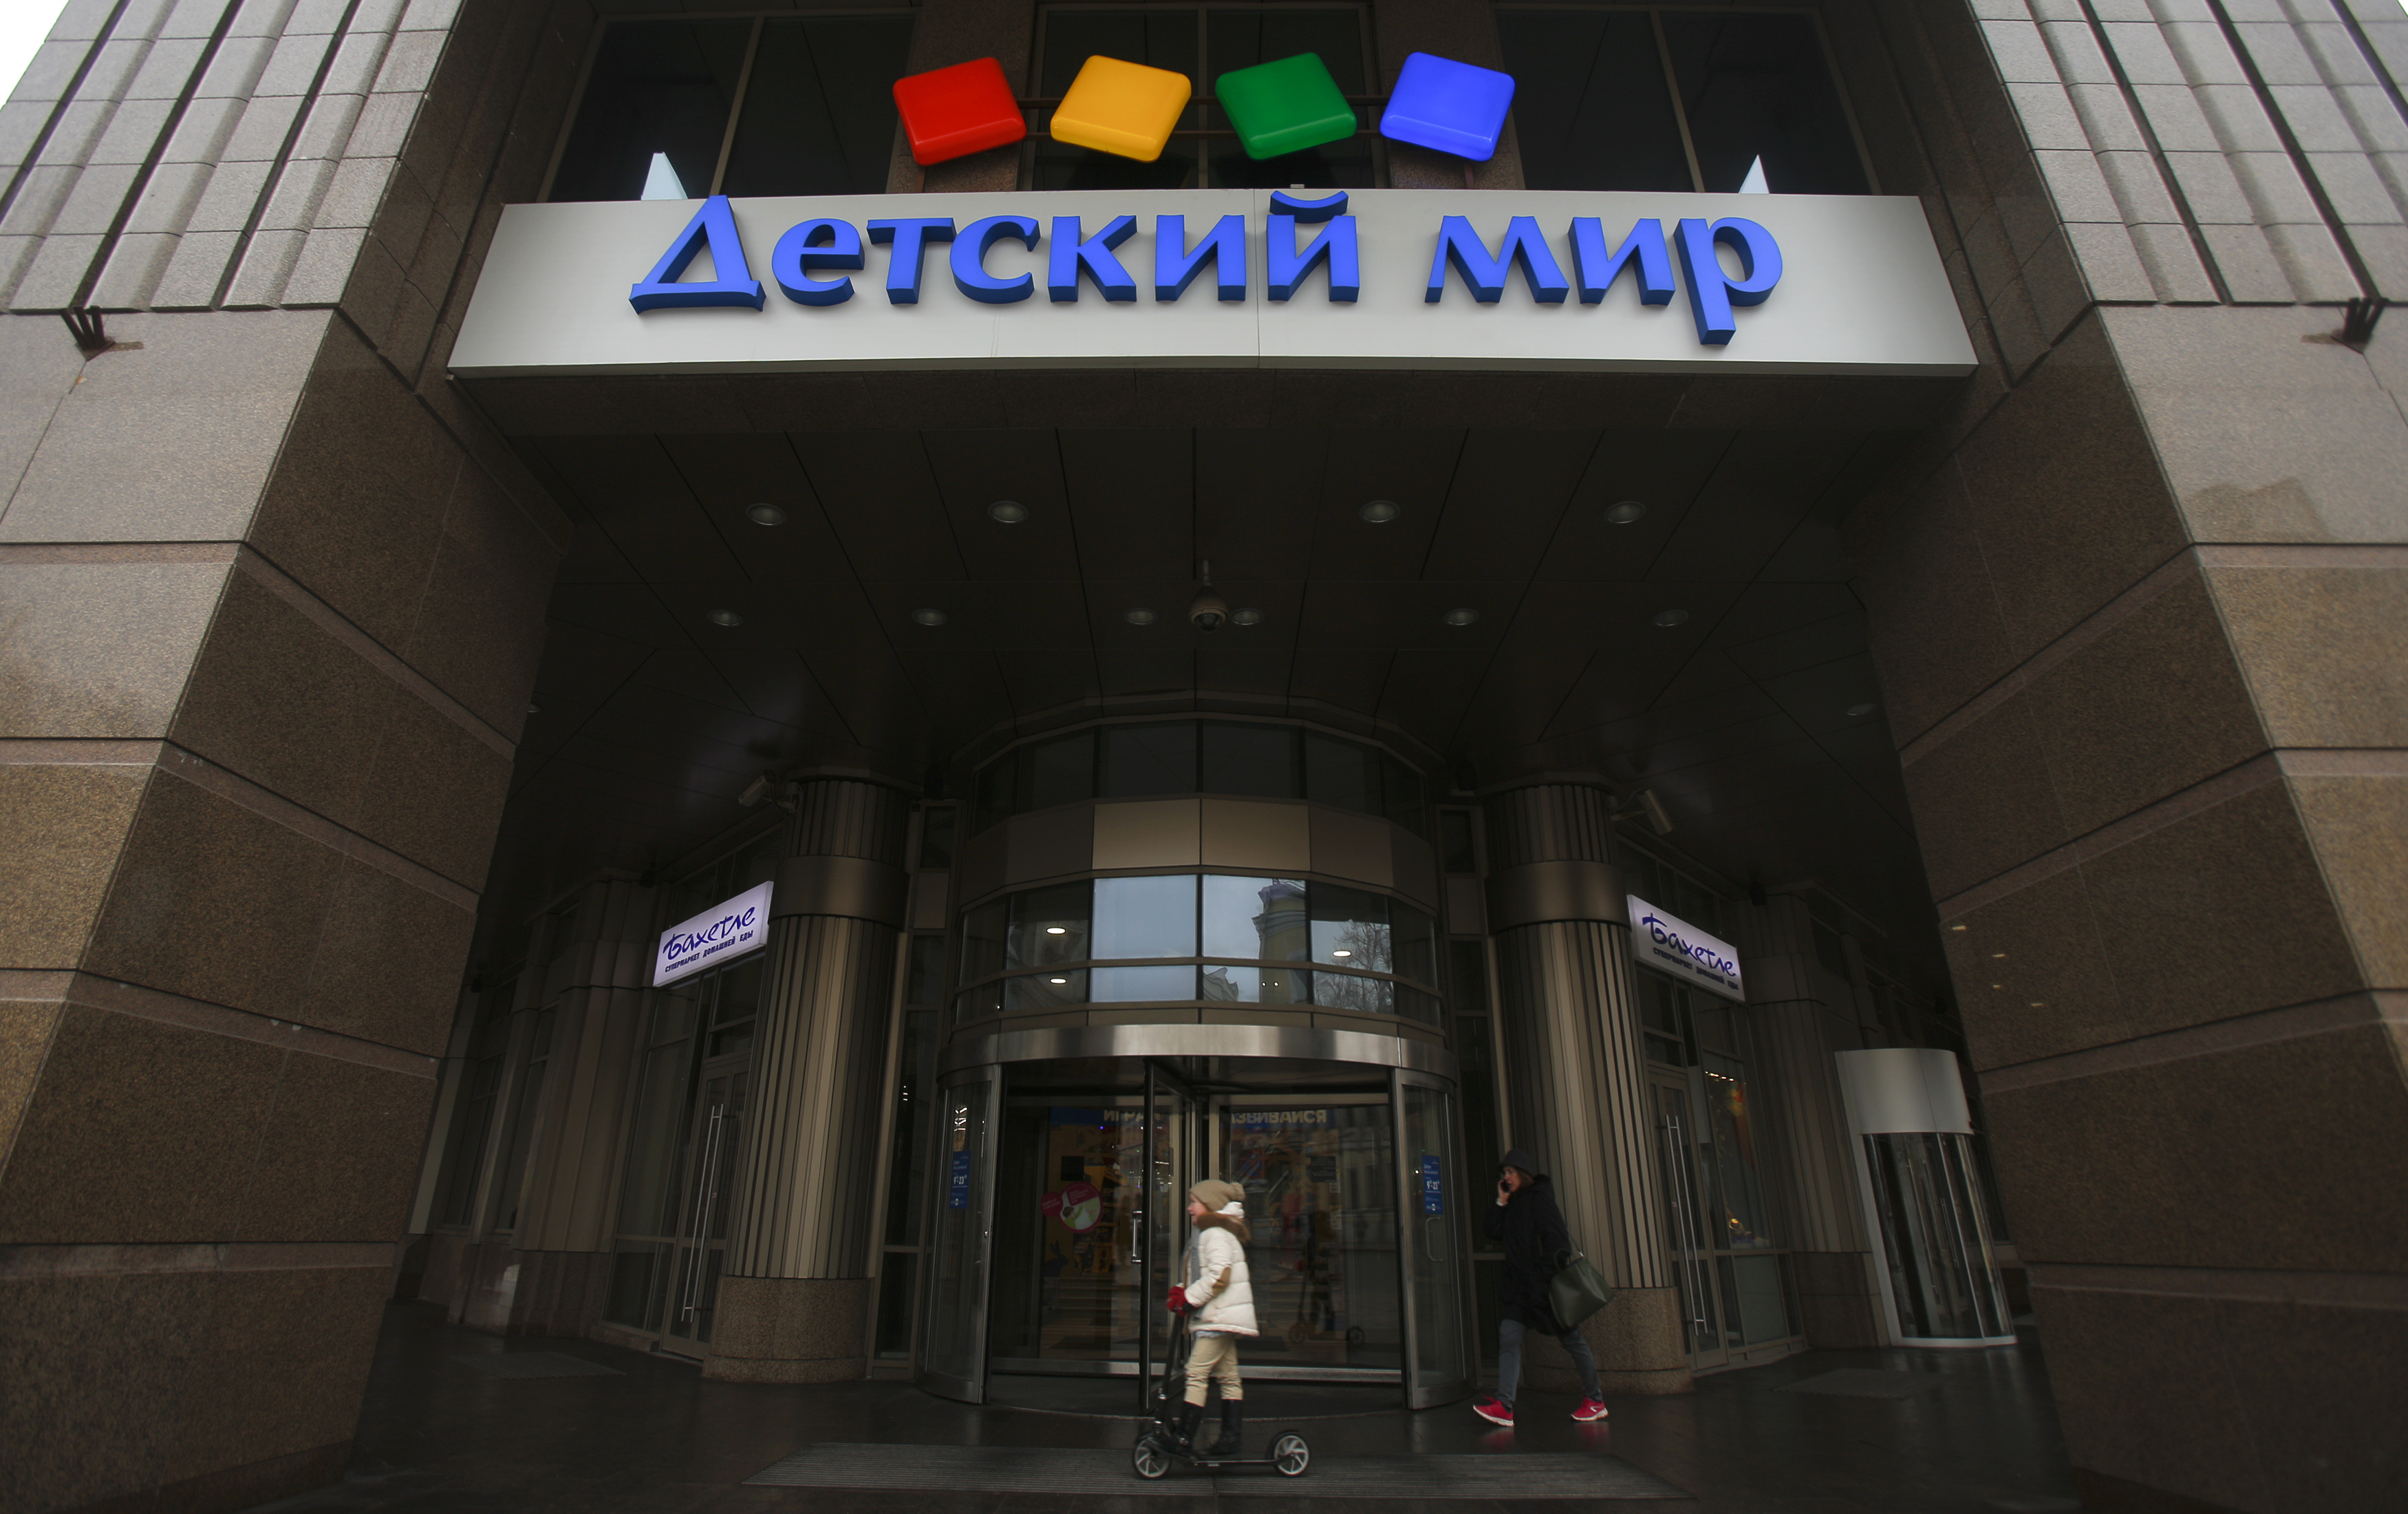 A board, showing the logo of Russian children's goods retailer Detsky Mir, is on display in Moscow